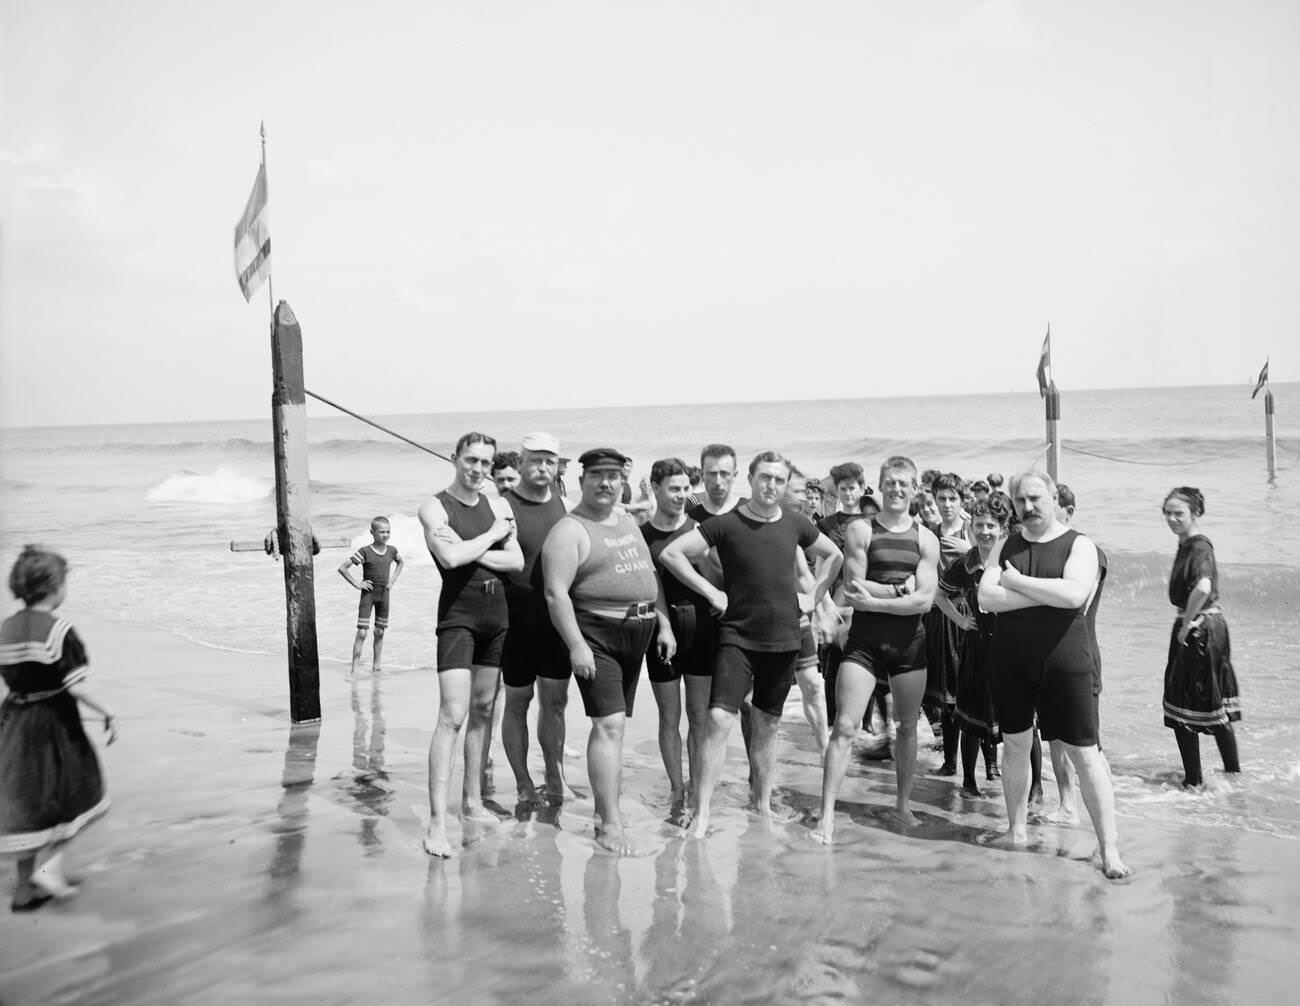 Portrait Of Lifeguards At Coney Island, Brooklyn, 1900